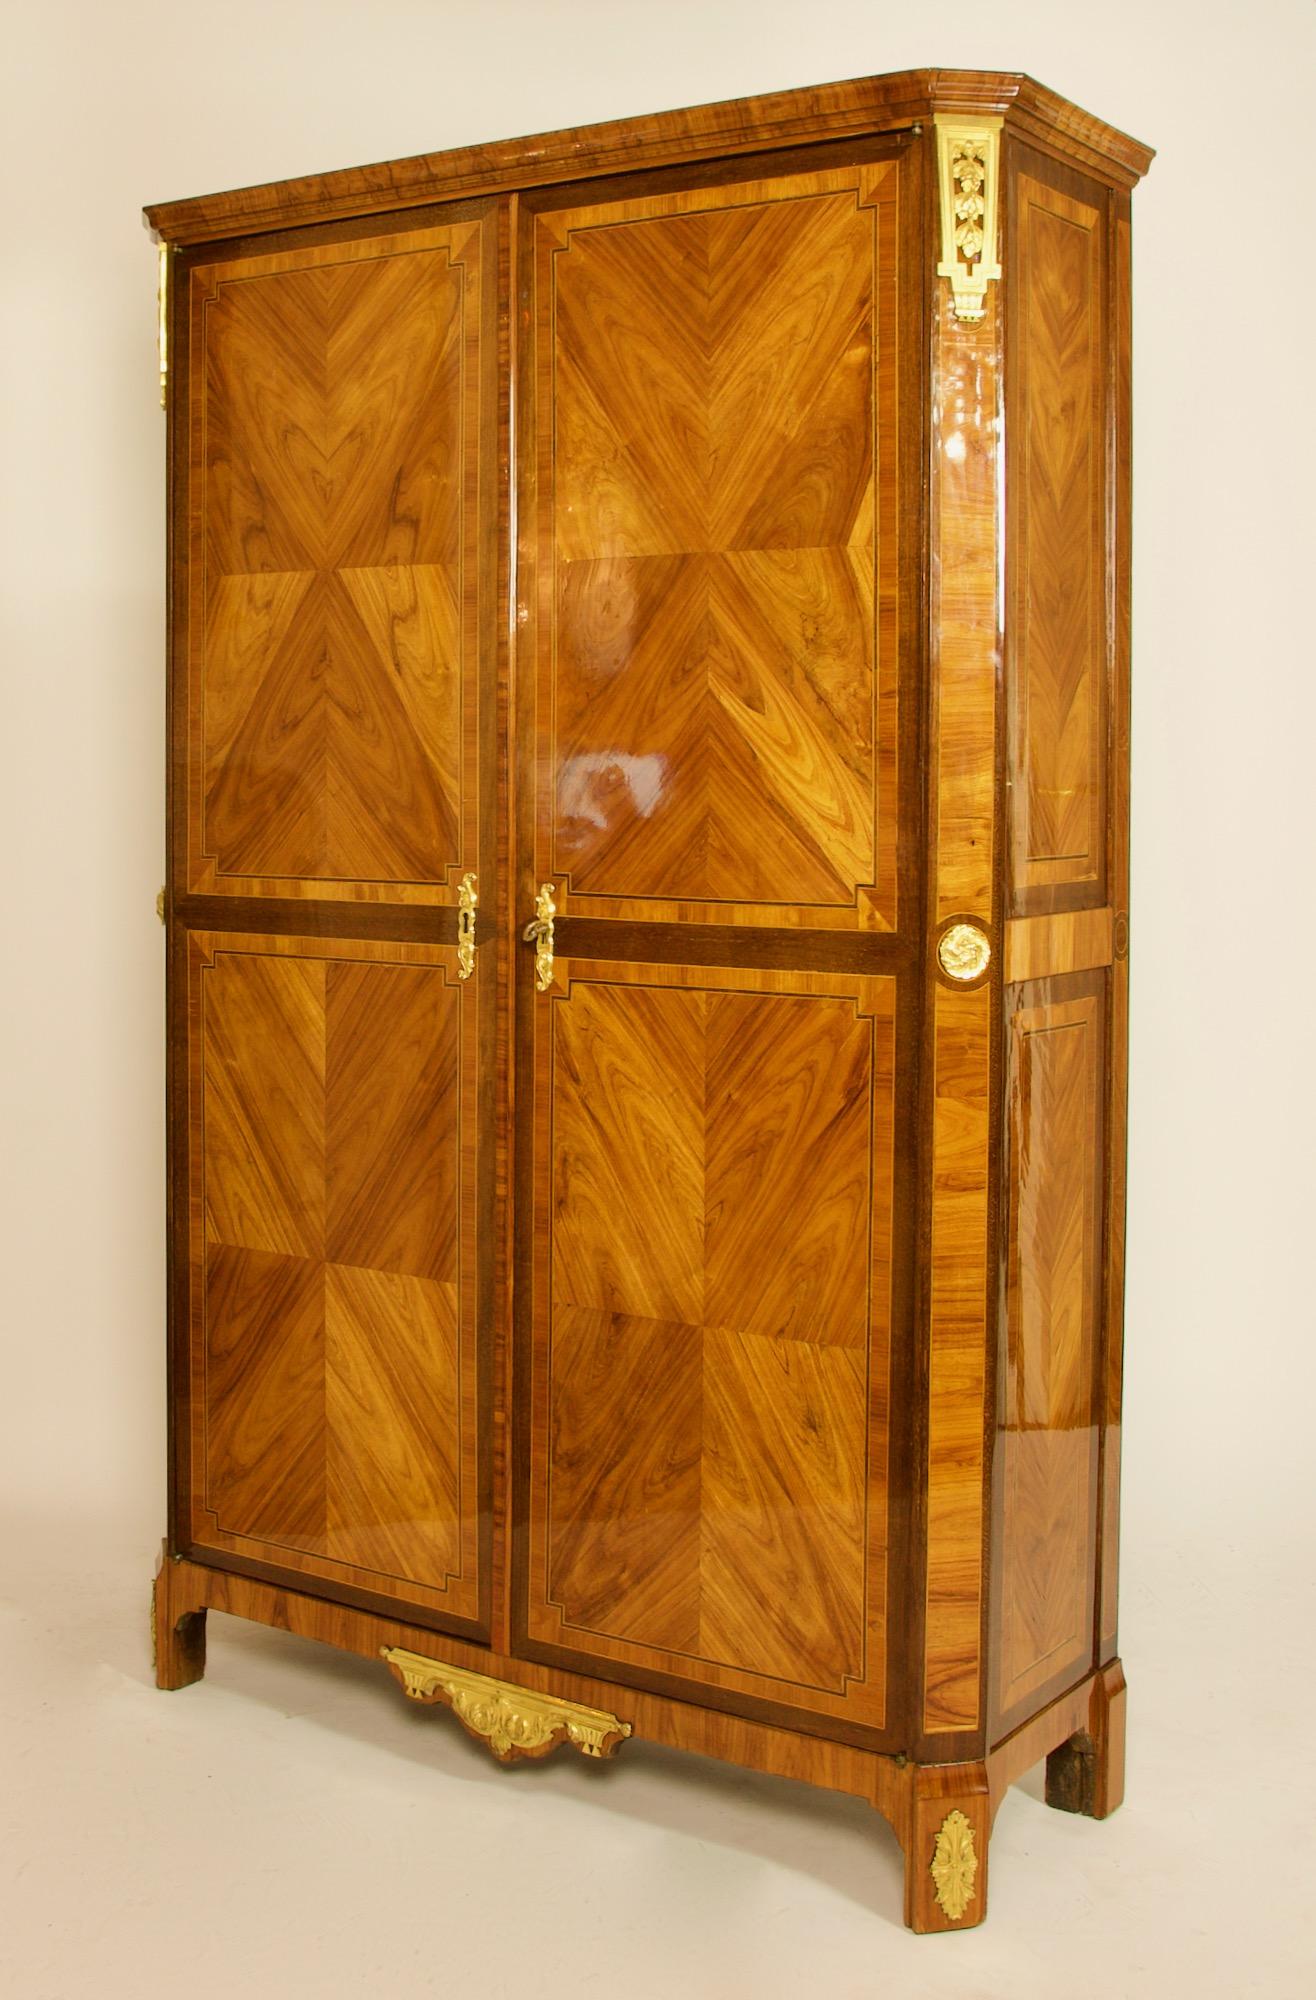 Important French 18th century Louis XVI Marquetry gilt bronze cabinet or armoire stamped by Roger Vandercruse dit Lacroix

An important and excellent Louis XVI cabinet of straight rectangular shape with canted corners standing on four bracket feet